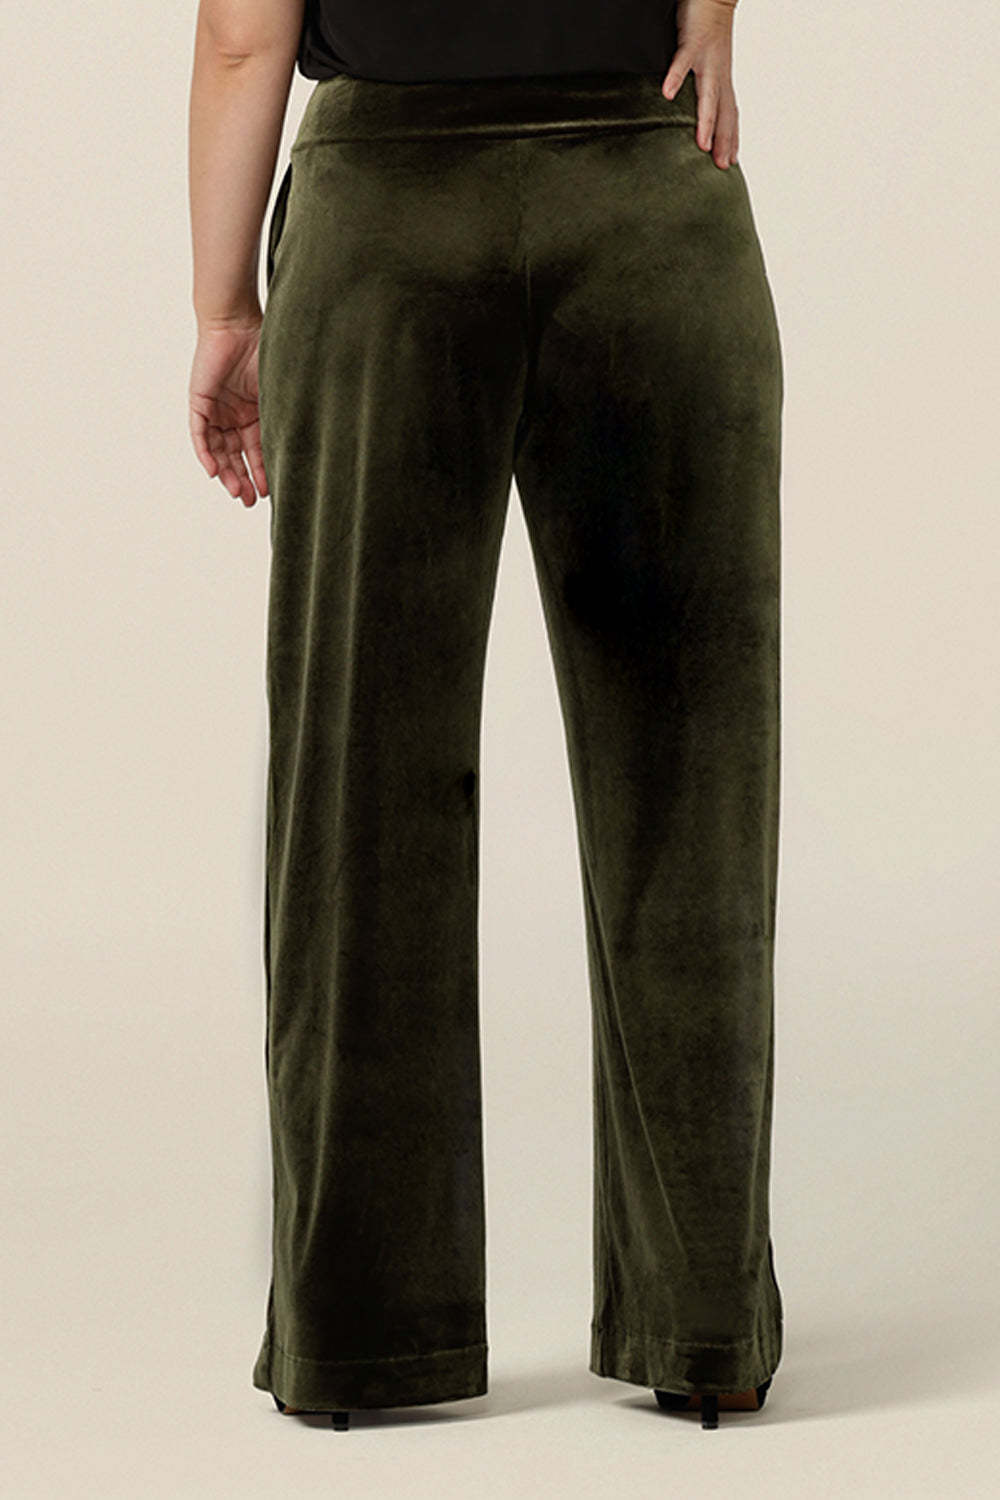 Back view of good cocktail pants for women, the Deni Pants are straight, wide leg pants in green velour. These velvet evening trousers are pull on pants and comfortable in stretch fabric. Shop this occasion and cocktail attire online at Australian fashion brand, Leina & Fleur.